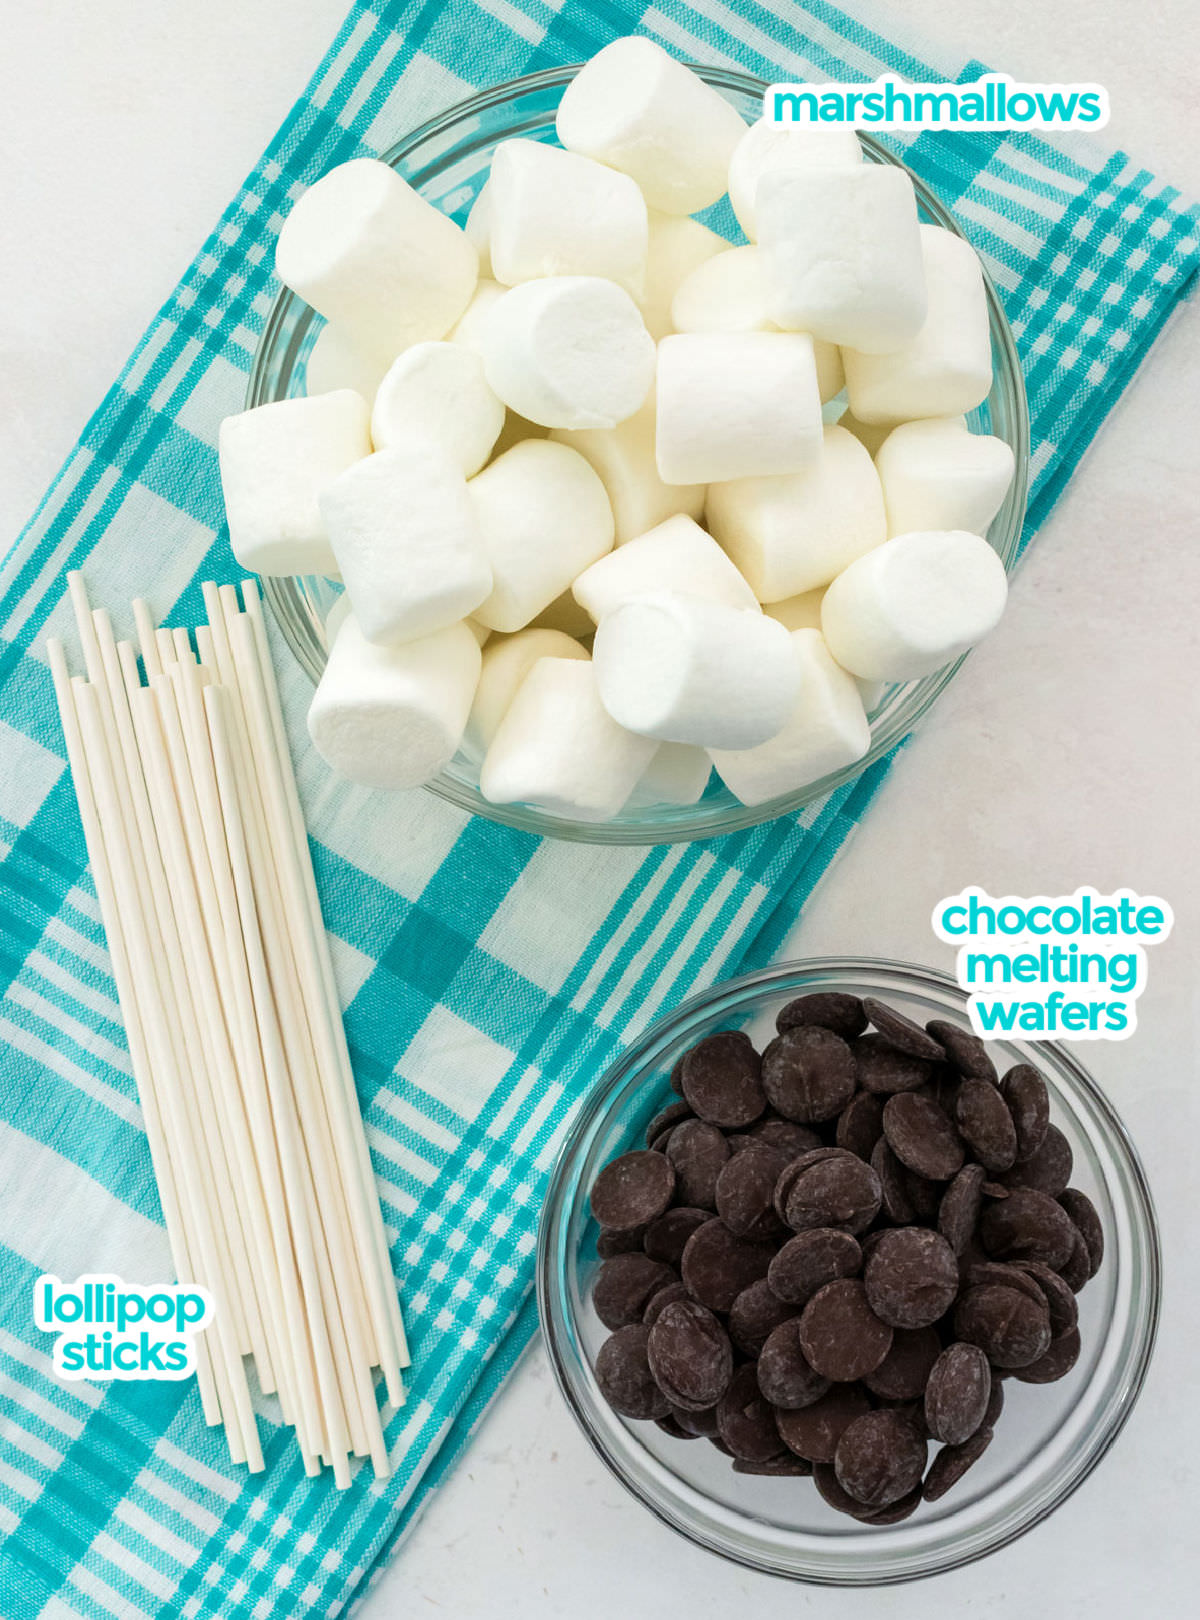 All the ingredients necessary to make Marshmallow Pops including marshmallows, chocolate melting wafers and lollipop sticks.